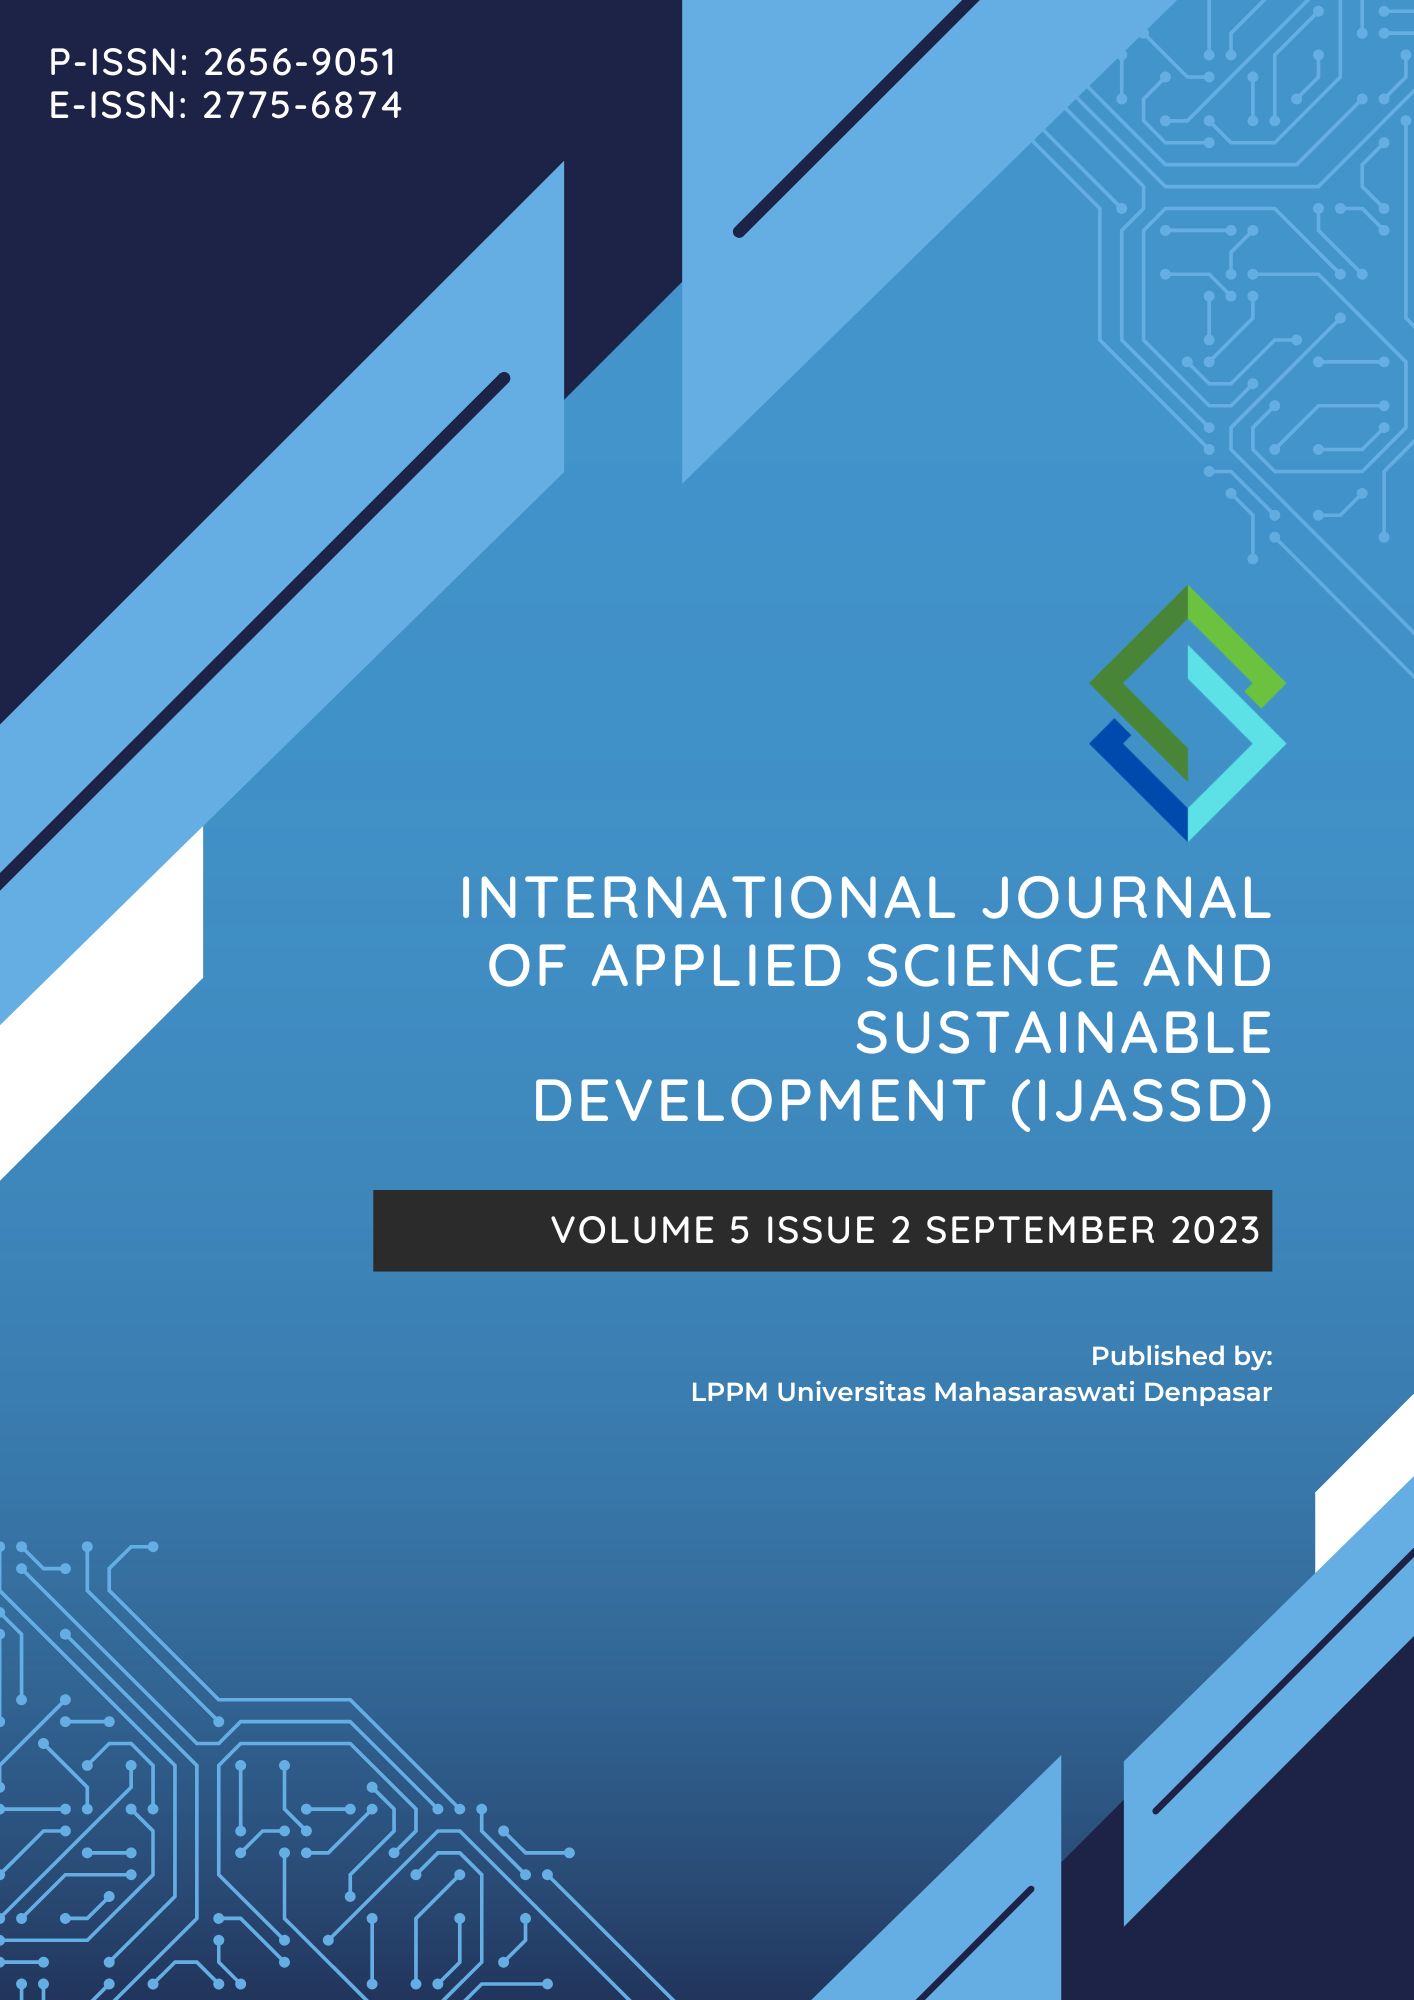 					View Vol. 5 No. 2 (2023): International Journal of Applied Science and Sustainable Development (IJASSD)
				